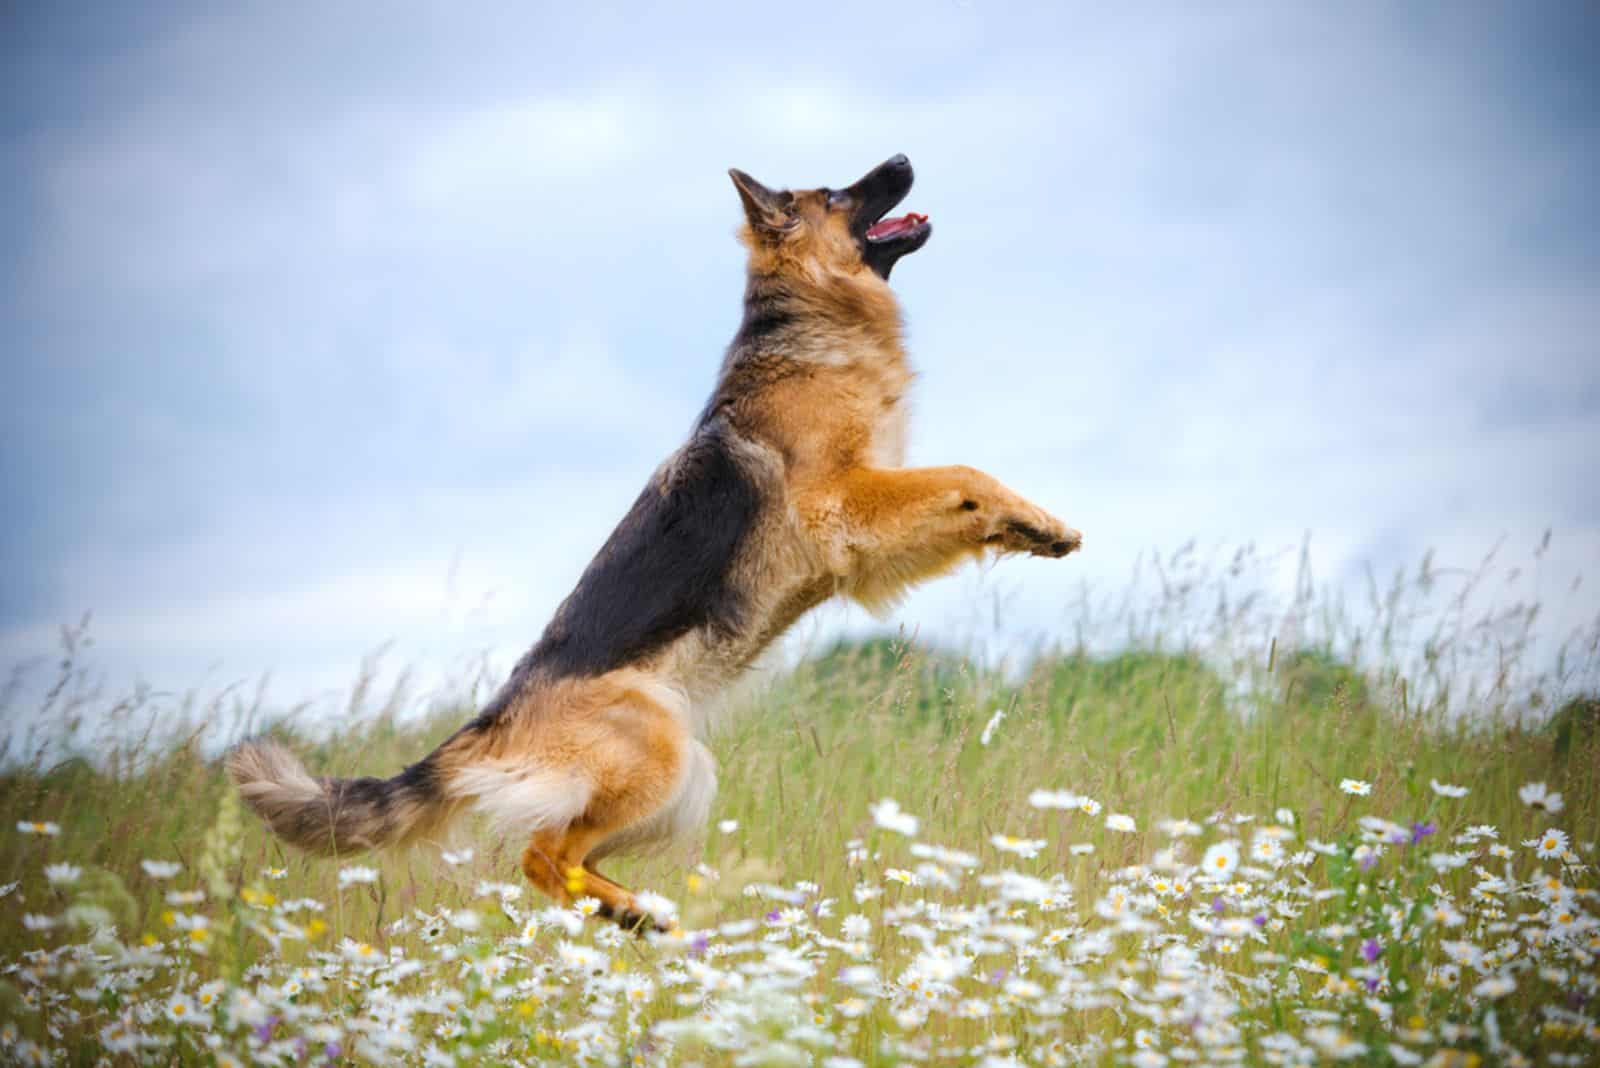 german shepherd dog jumps up in the air